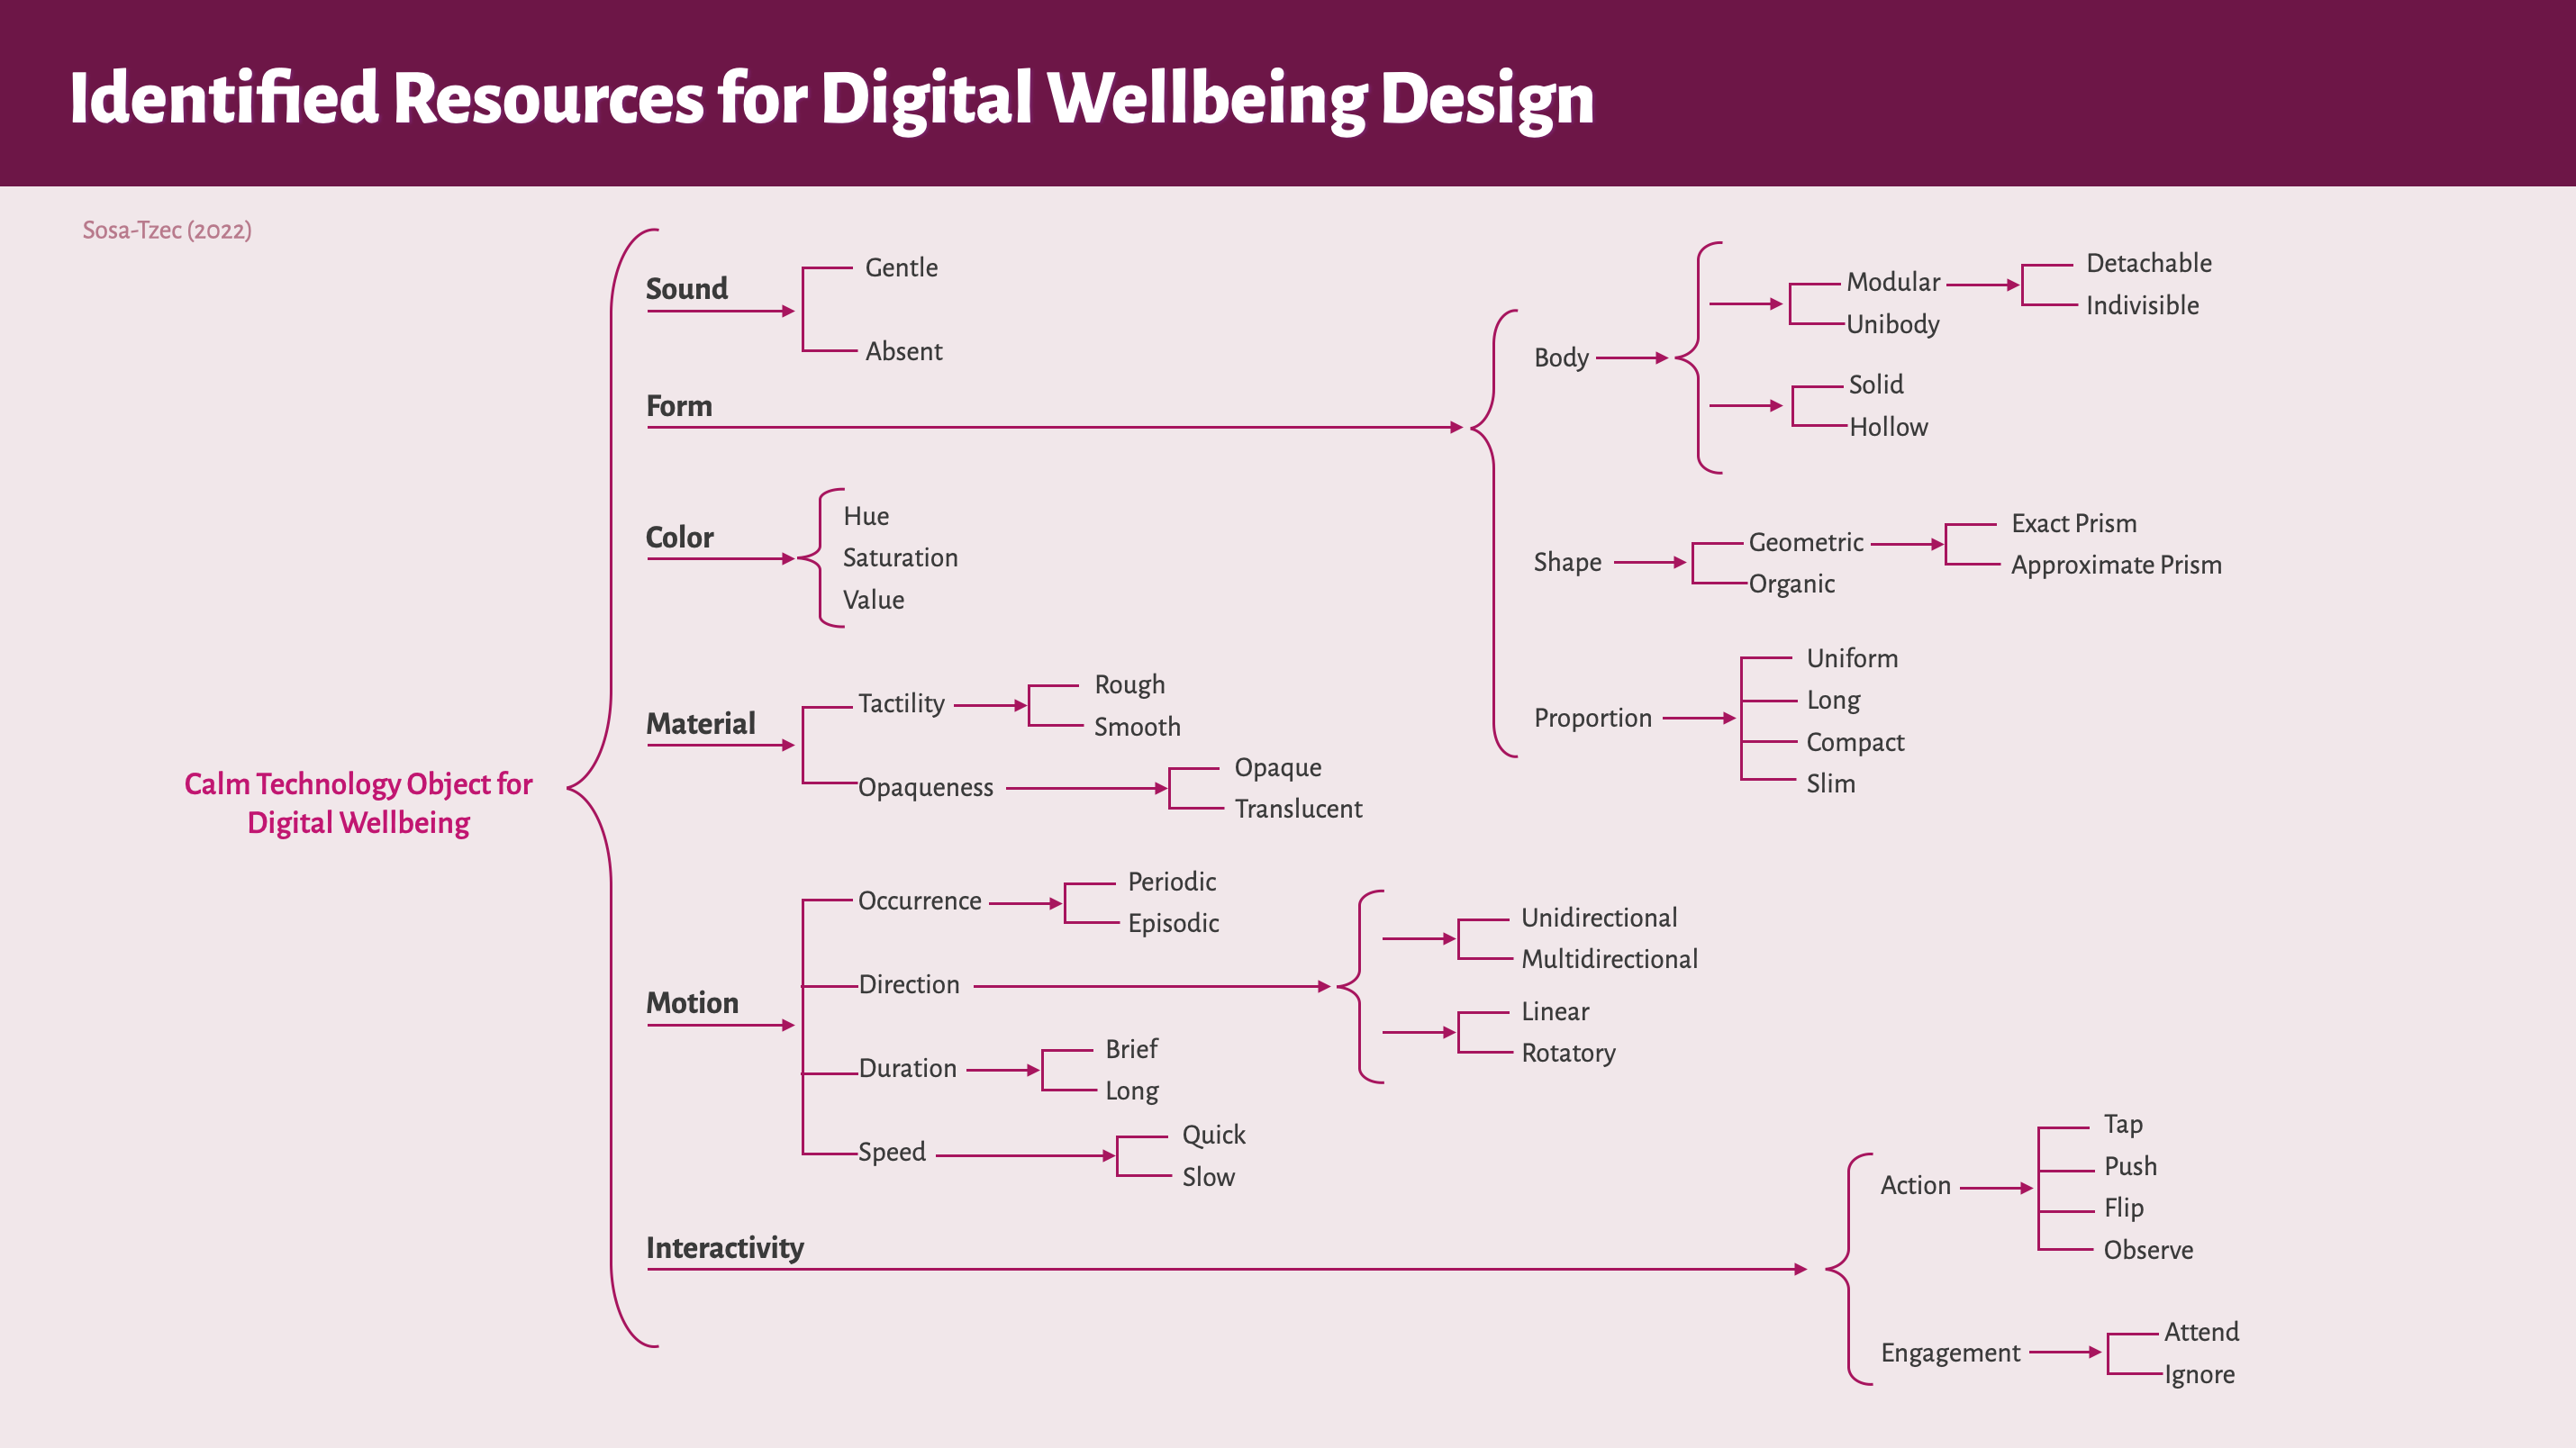 System network diagram of identified resources to design for digital wellbeing by Omar Sosa-Tzec (2022)